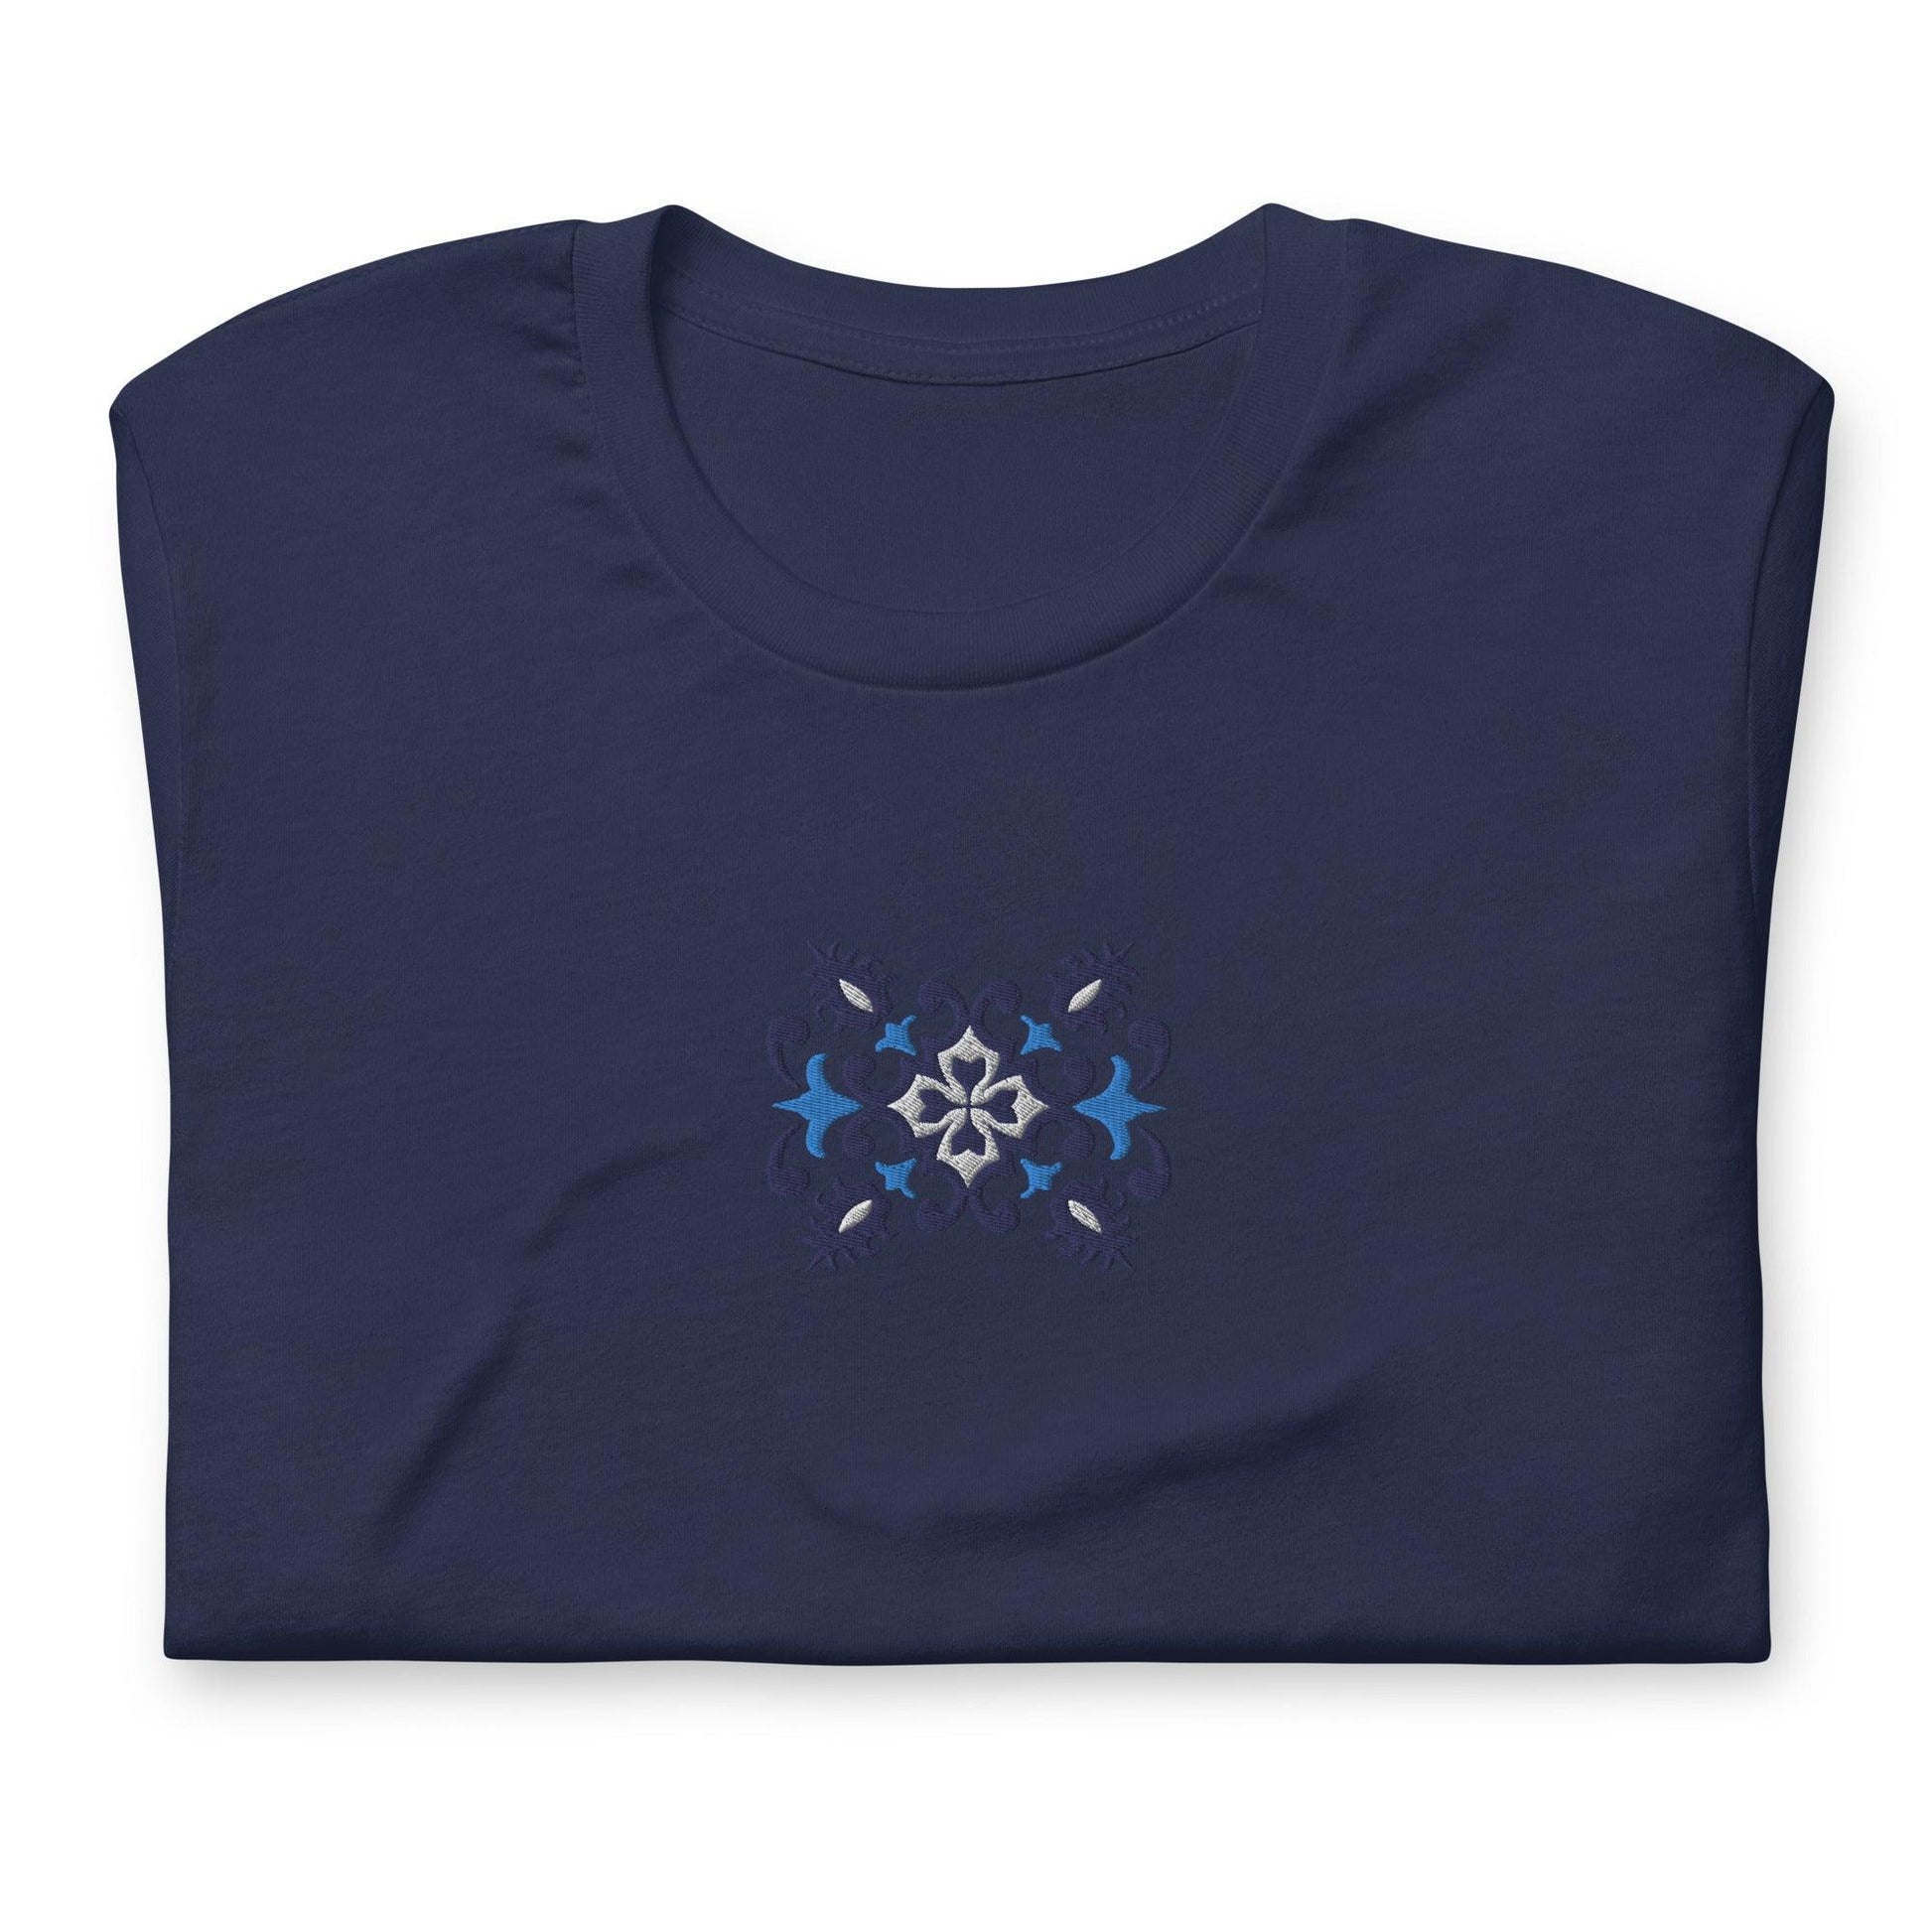 Portuguese Azulejo Tile Embroidered T-shirt - The Global Wanderer